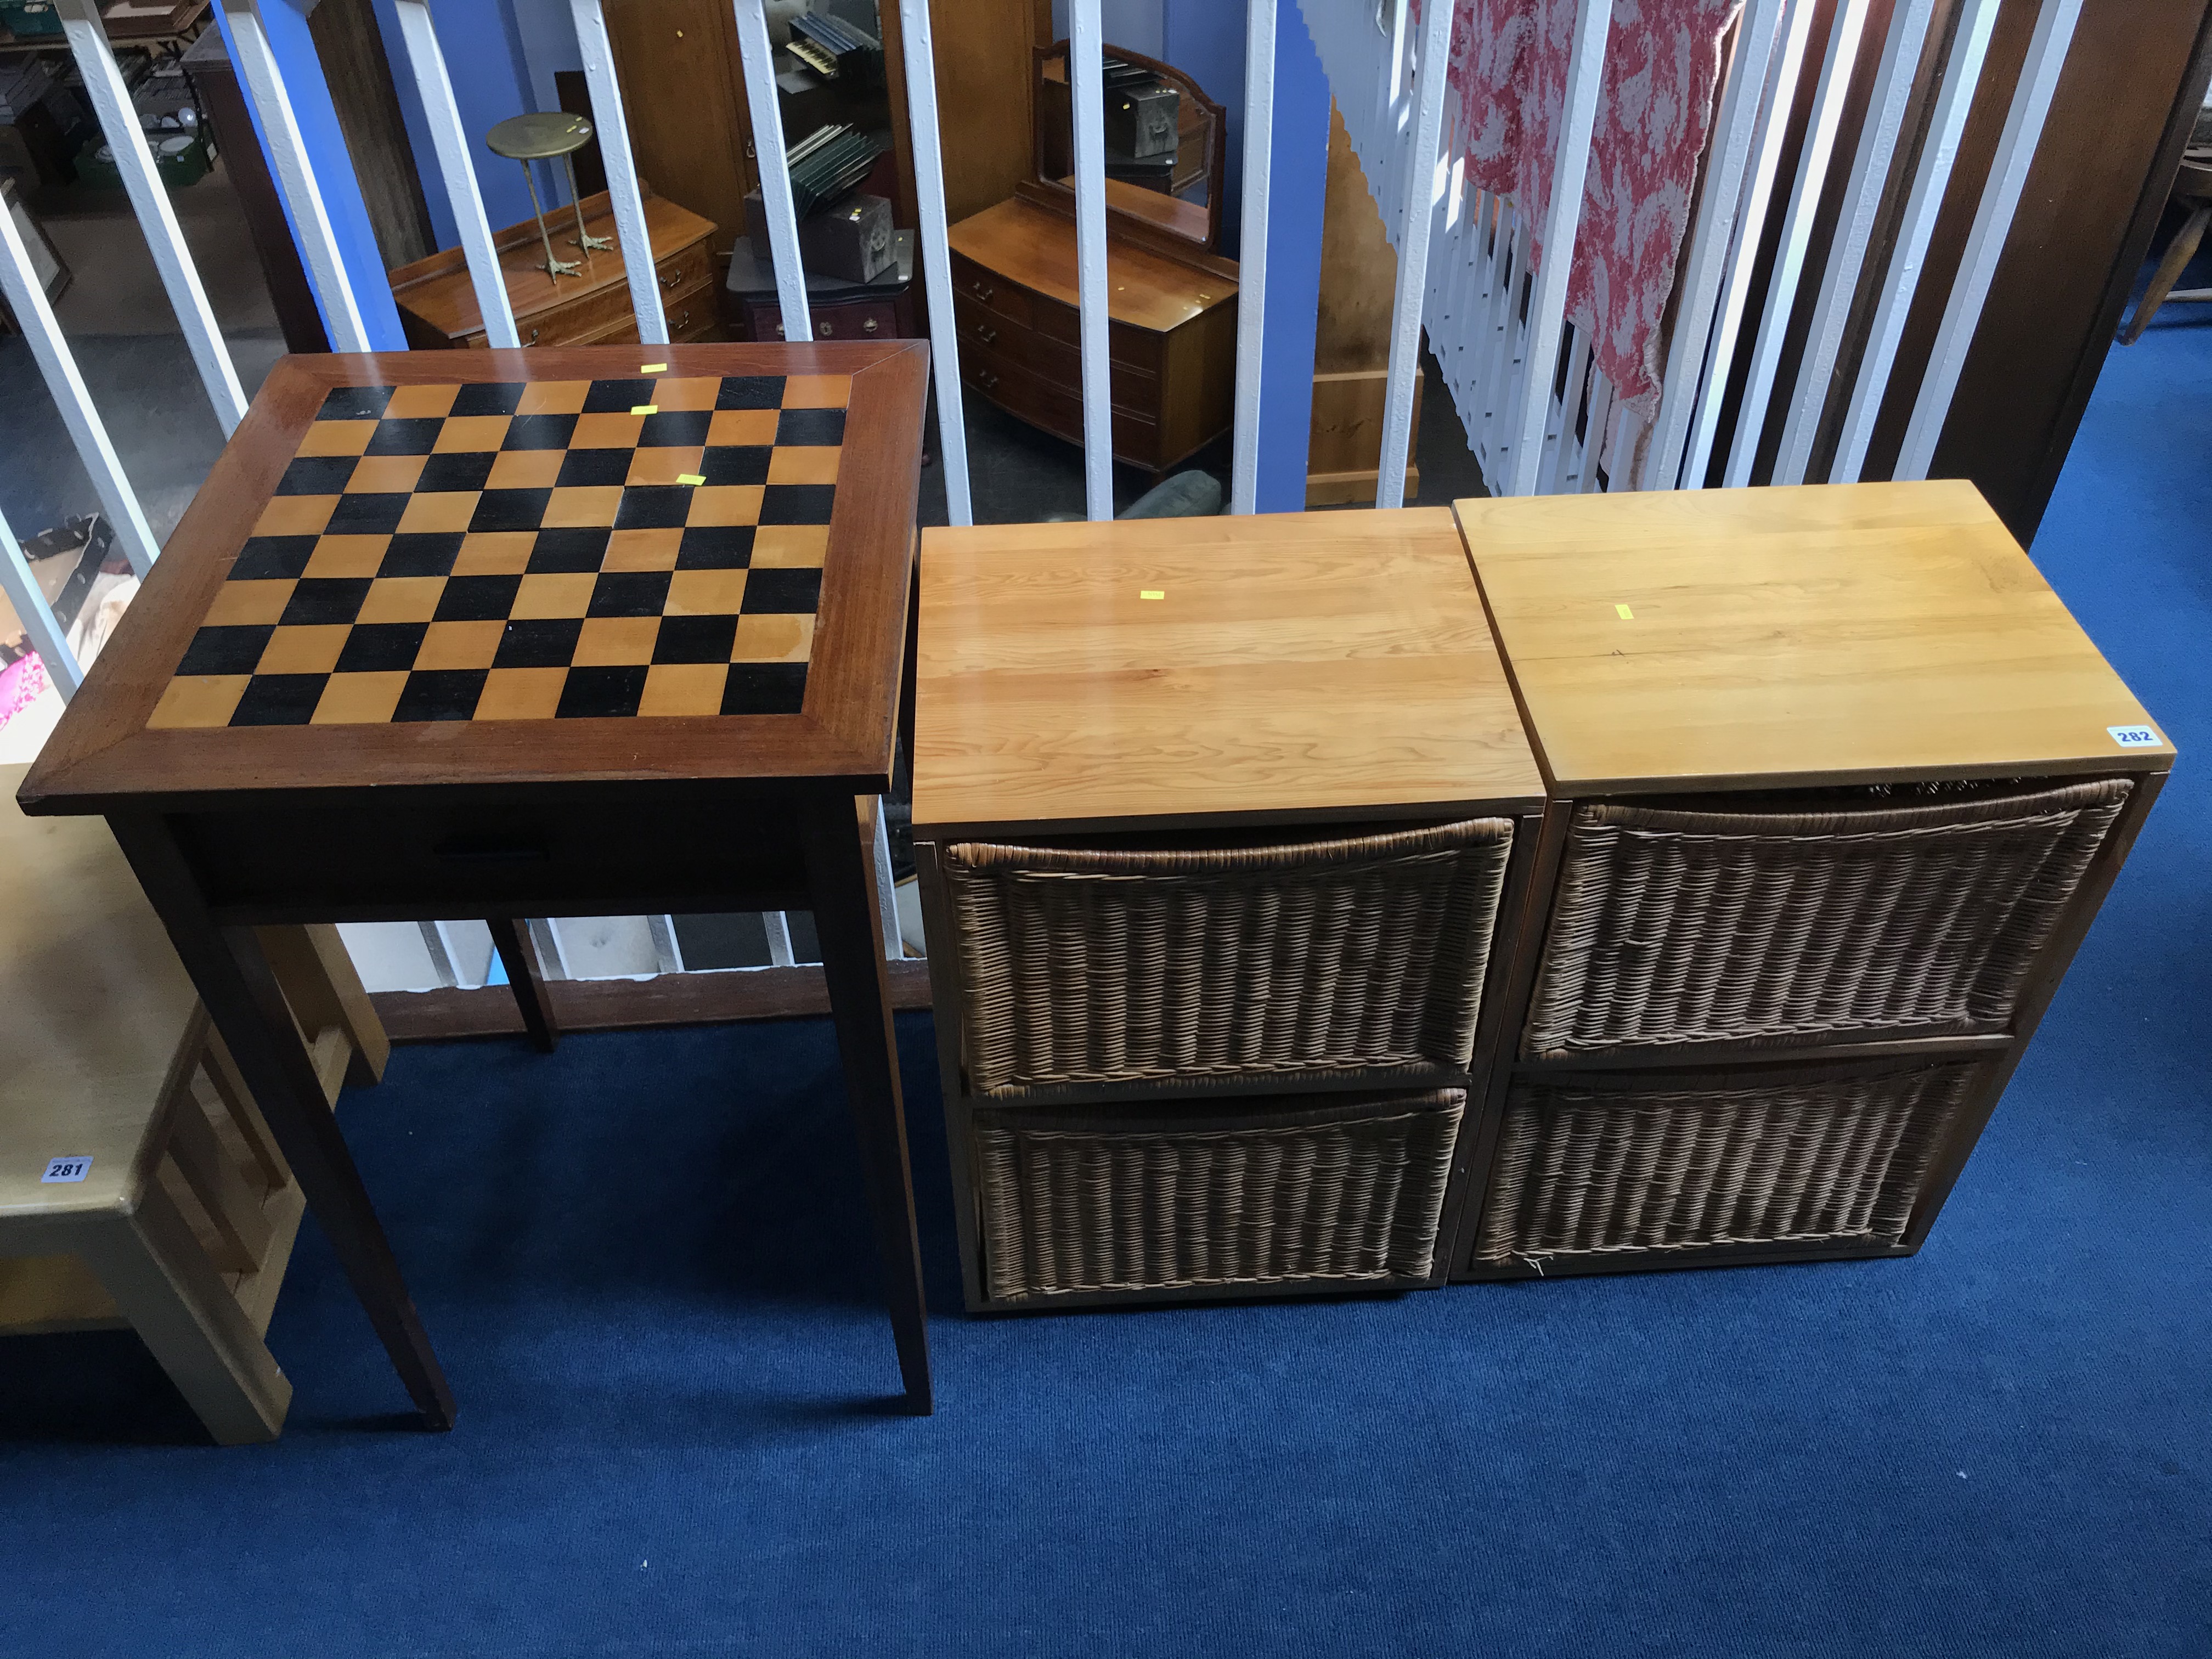 Chess top table and a pair of basket chests